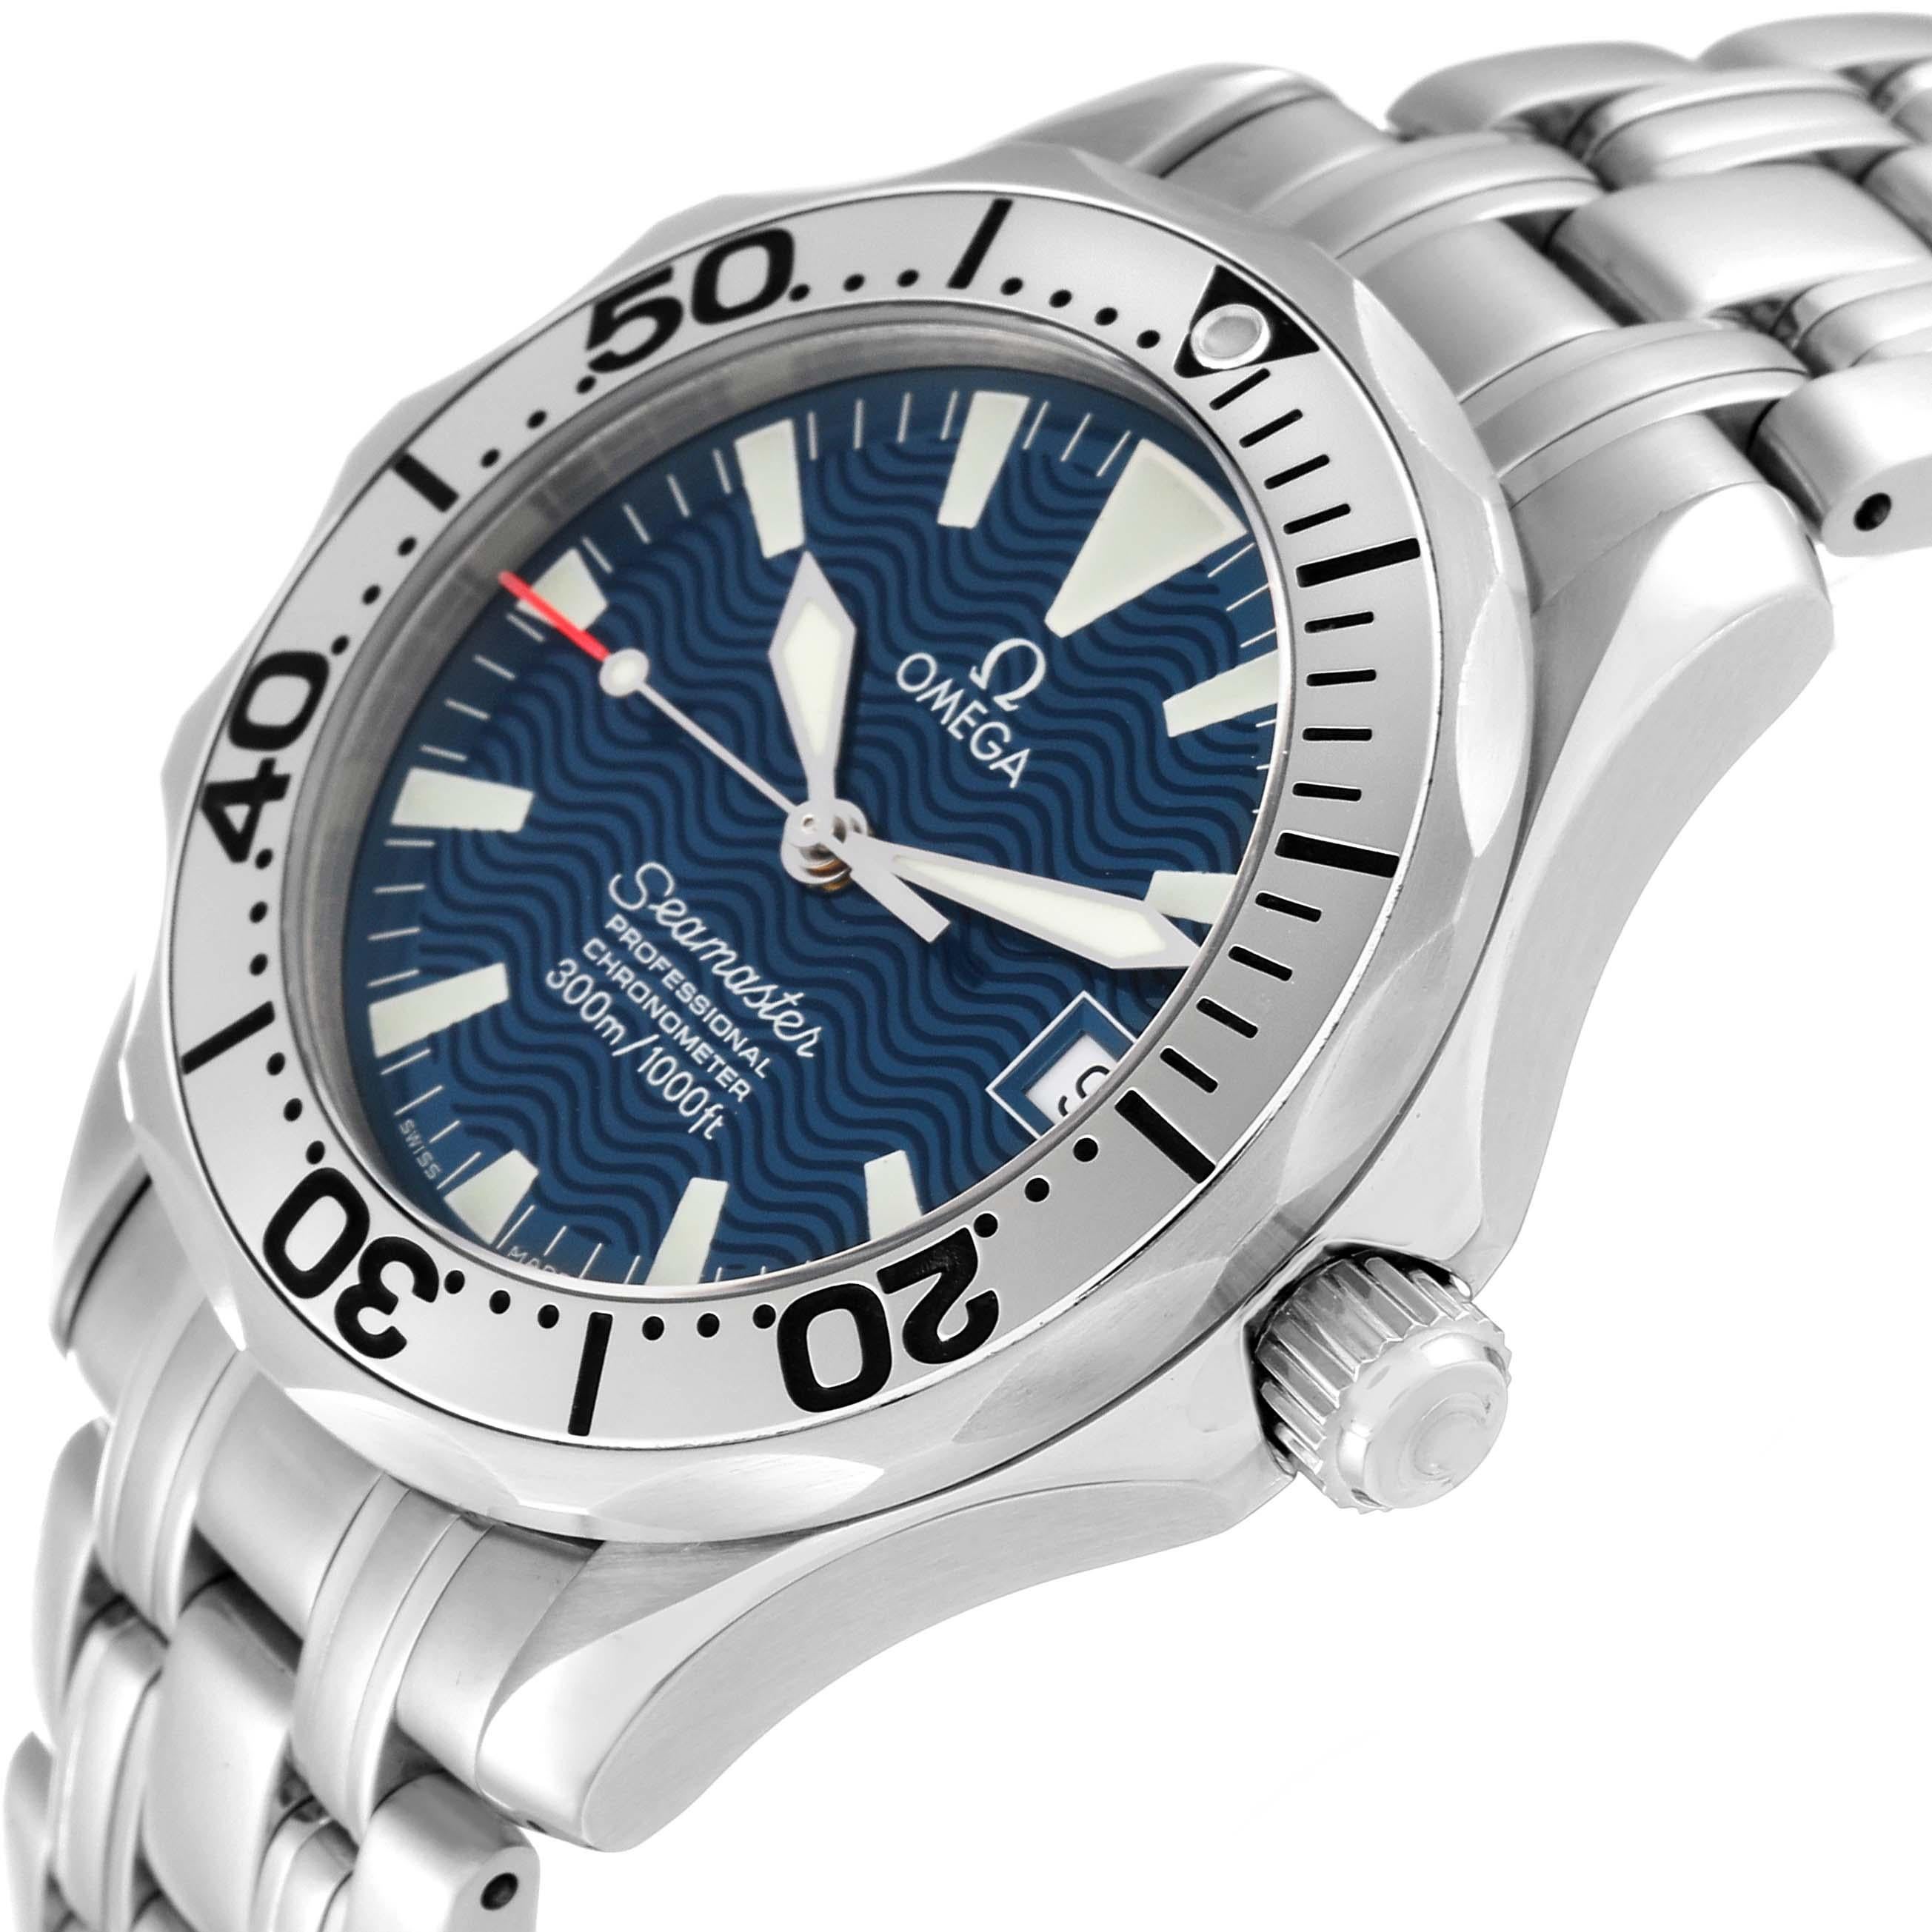 Omega Seamaster 300M Blue Dial Steel Mens Watch 2253.80.00 1